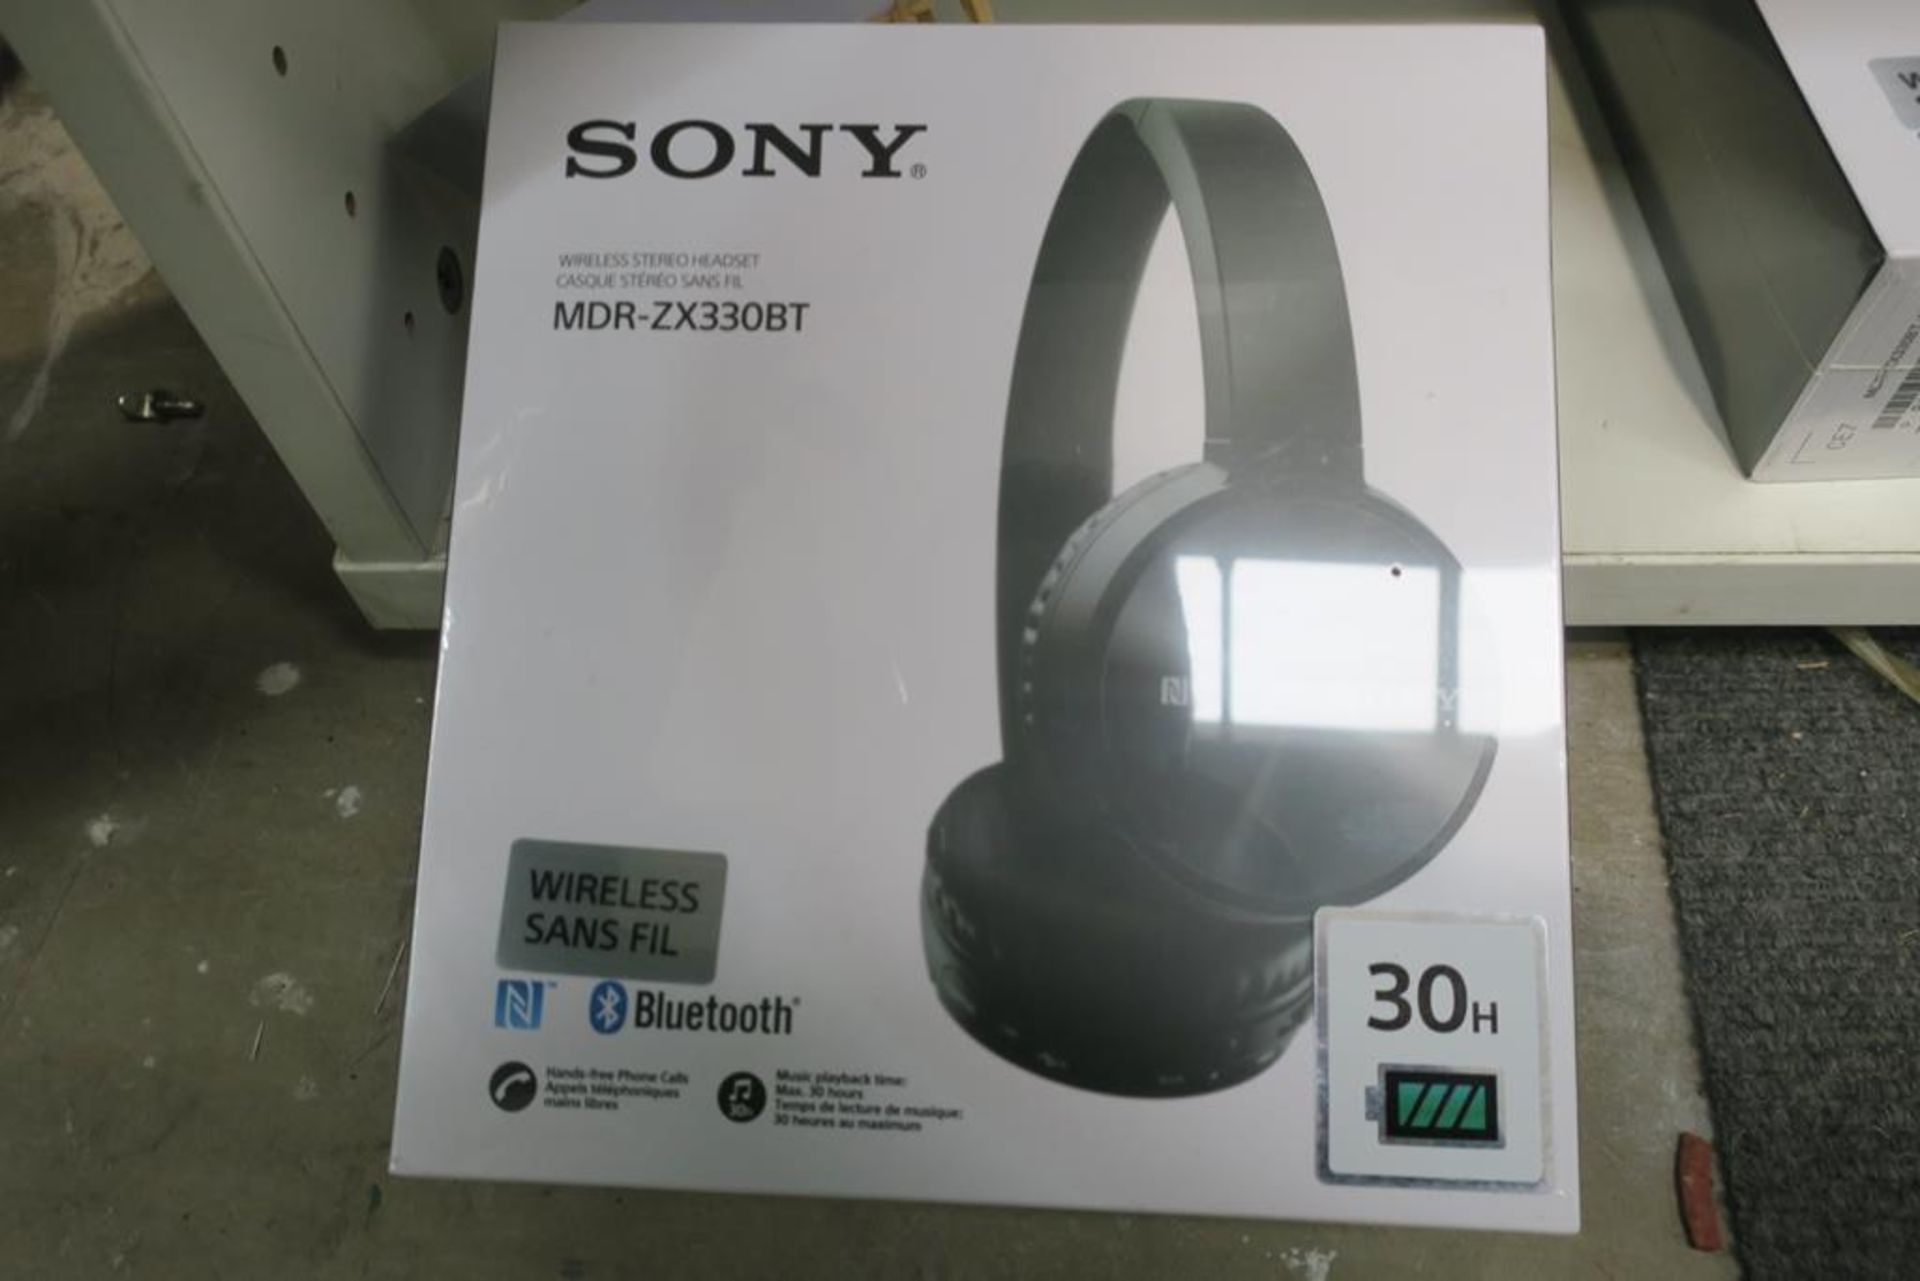 Sony MDR-ZX330BT Wireless Headphones together with Marley 'Little Bird' In Ear Headphones - Image 2 of 2